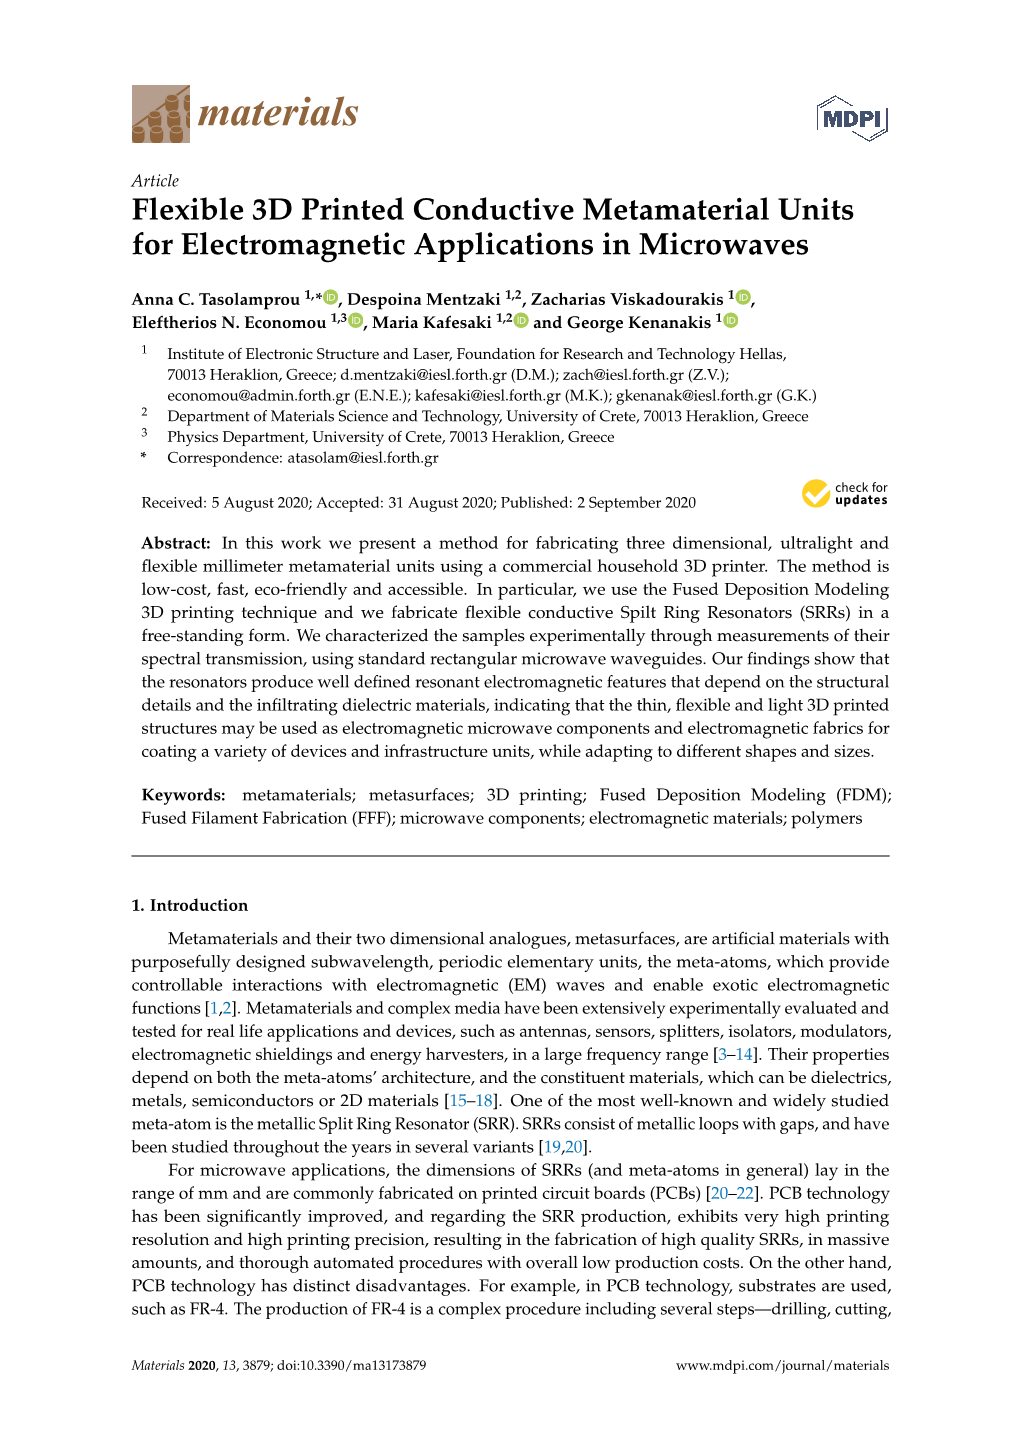 Flexible 3D Printed Conductive Metamaterial Units for Electromagnetic Applications in Microwaves